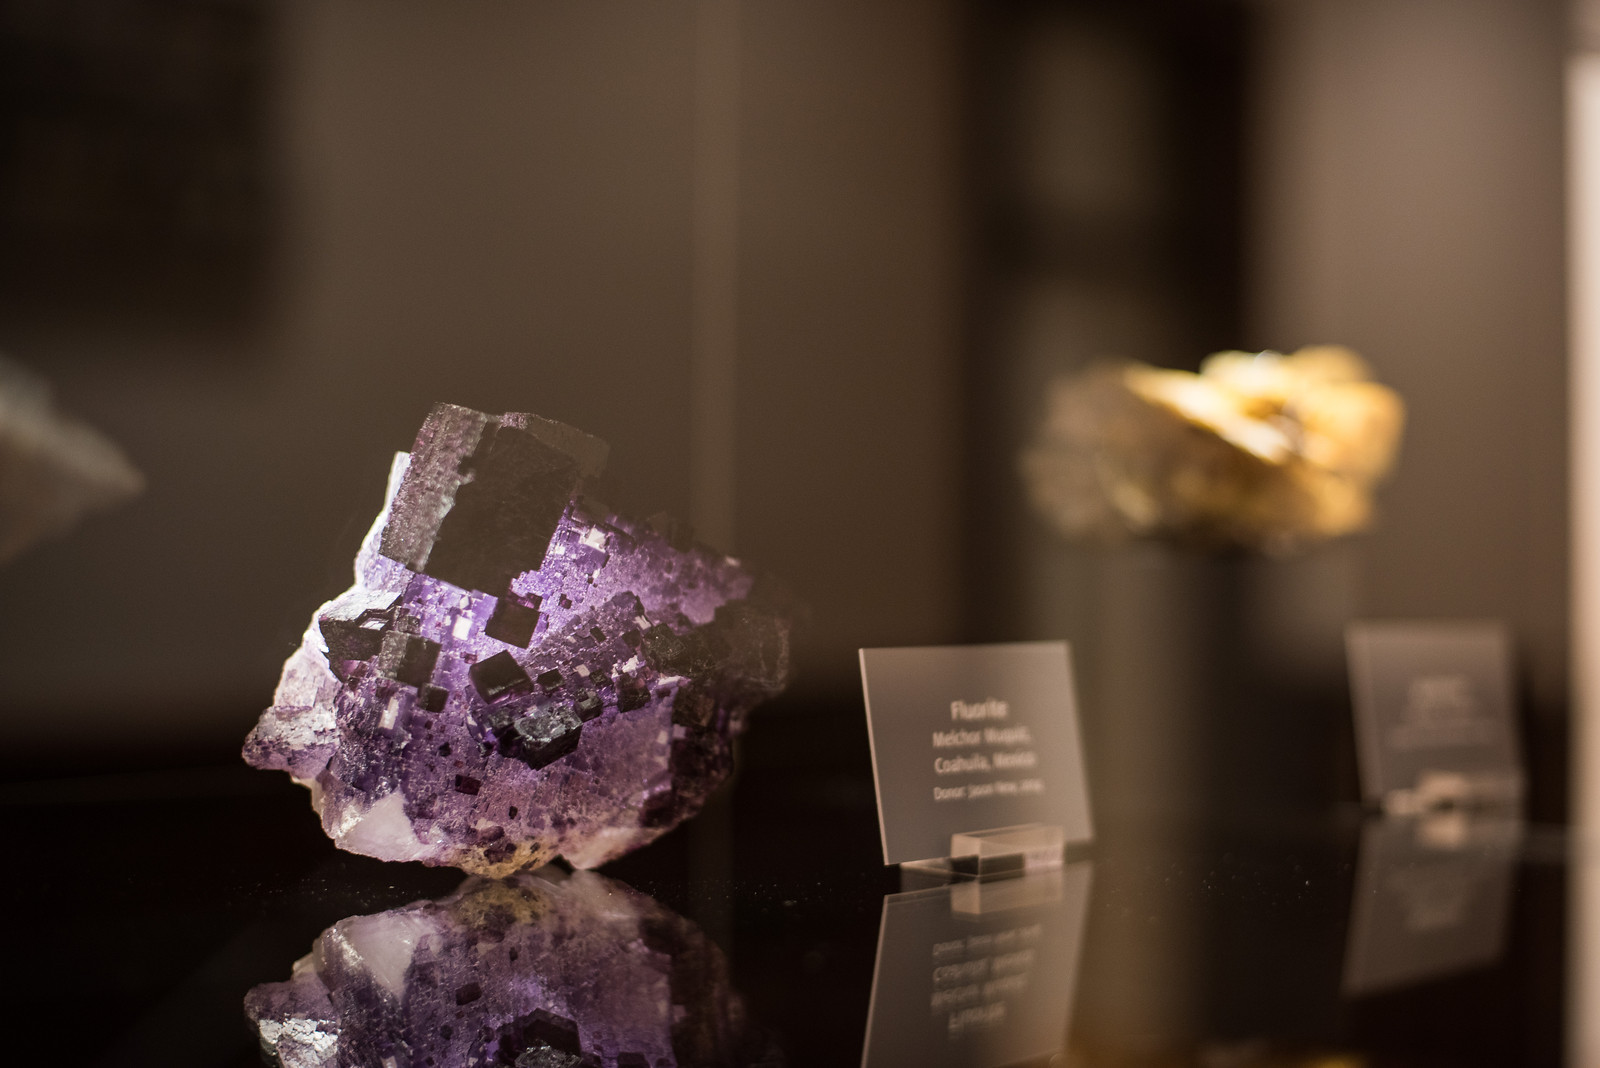 Image of a mineral on display